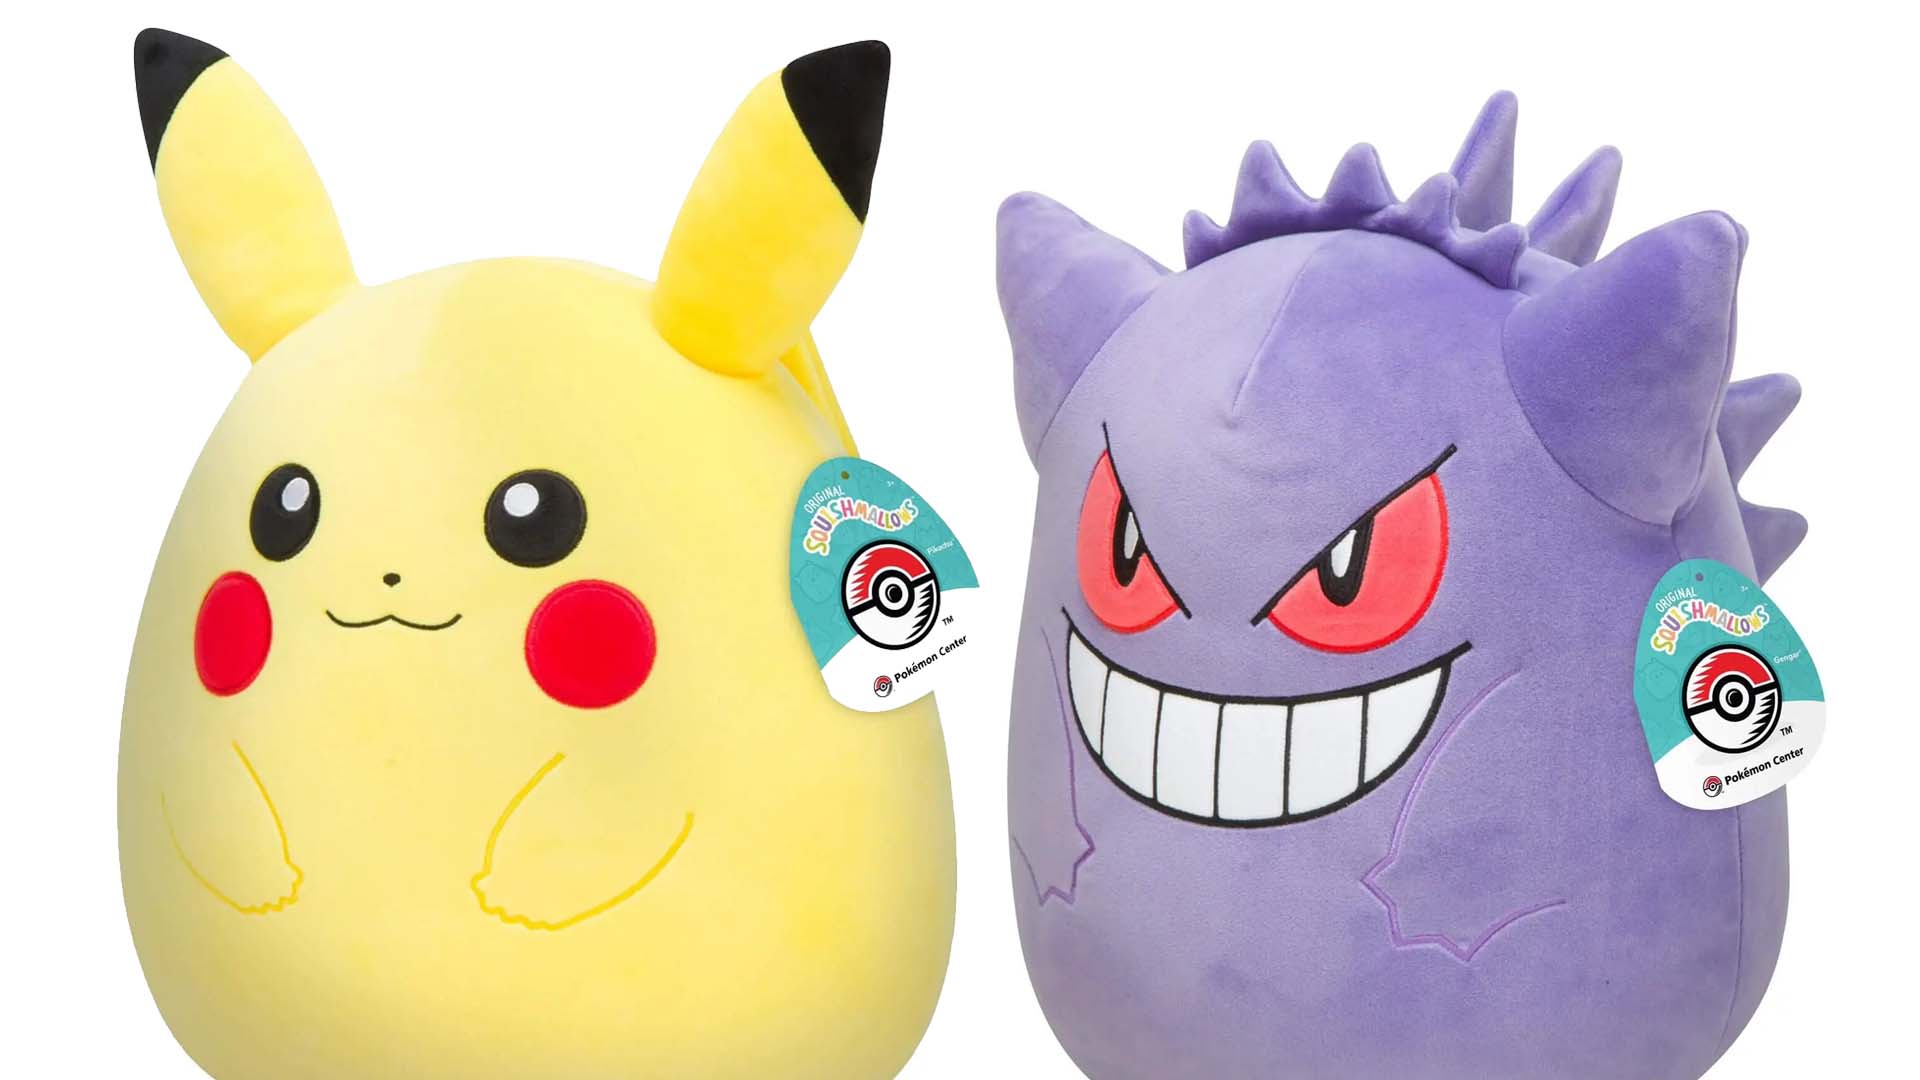 Two Pop-Culture Sensations Squishmallows and Pokemon Join Forces For an  Epic Plush Collaboration - Licensing International